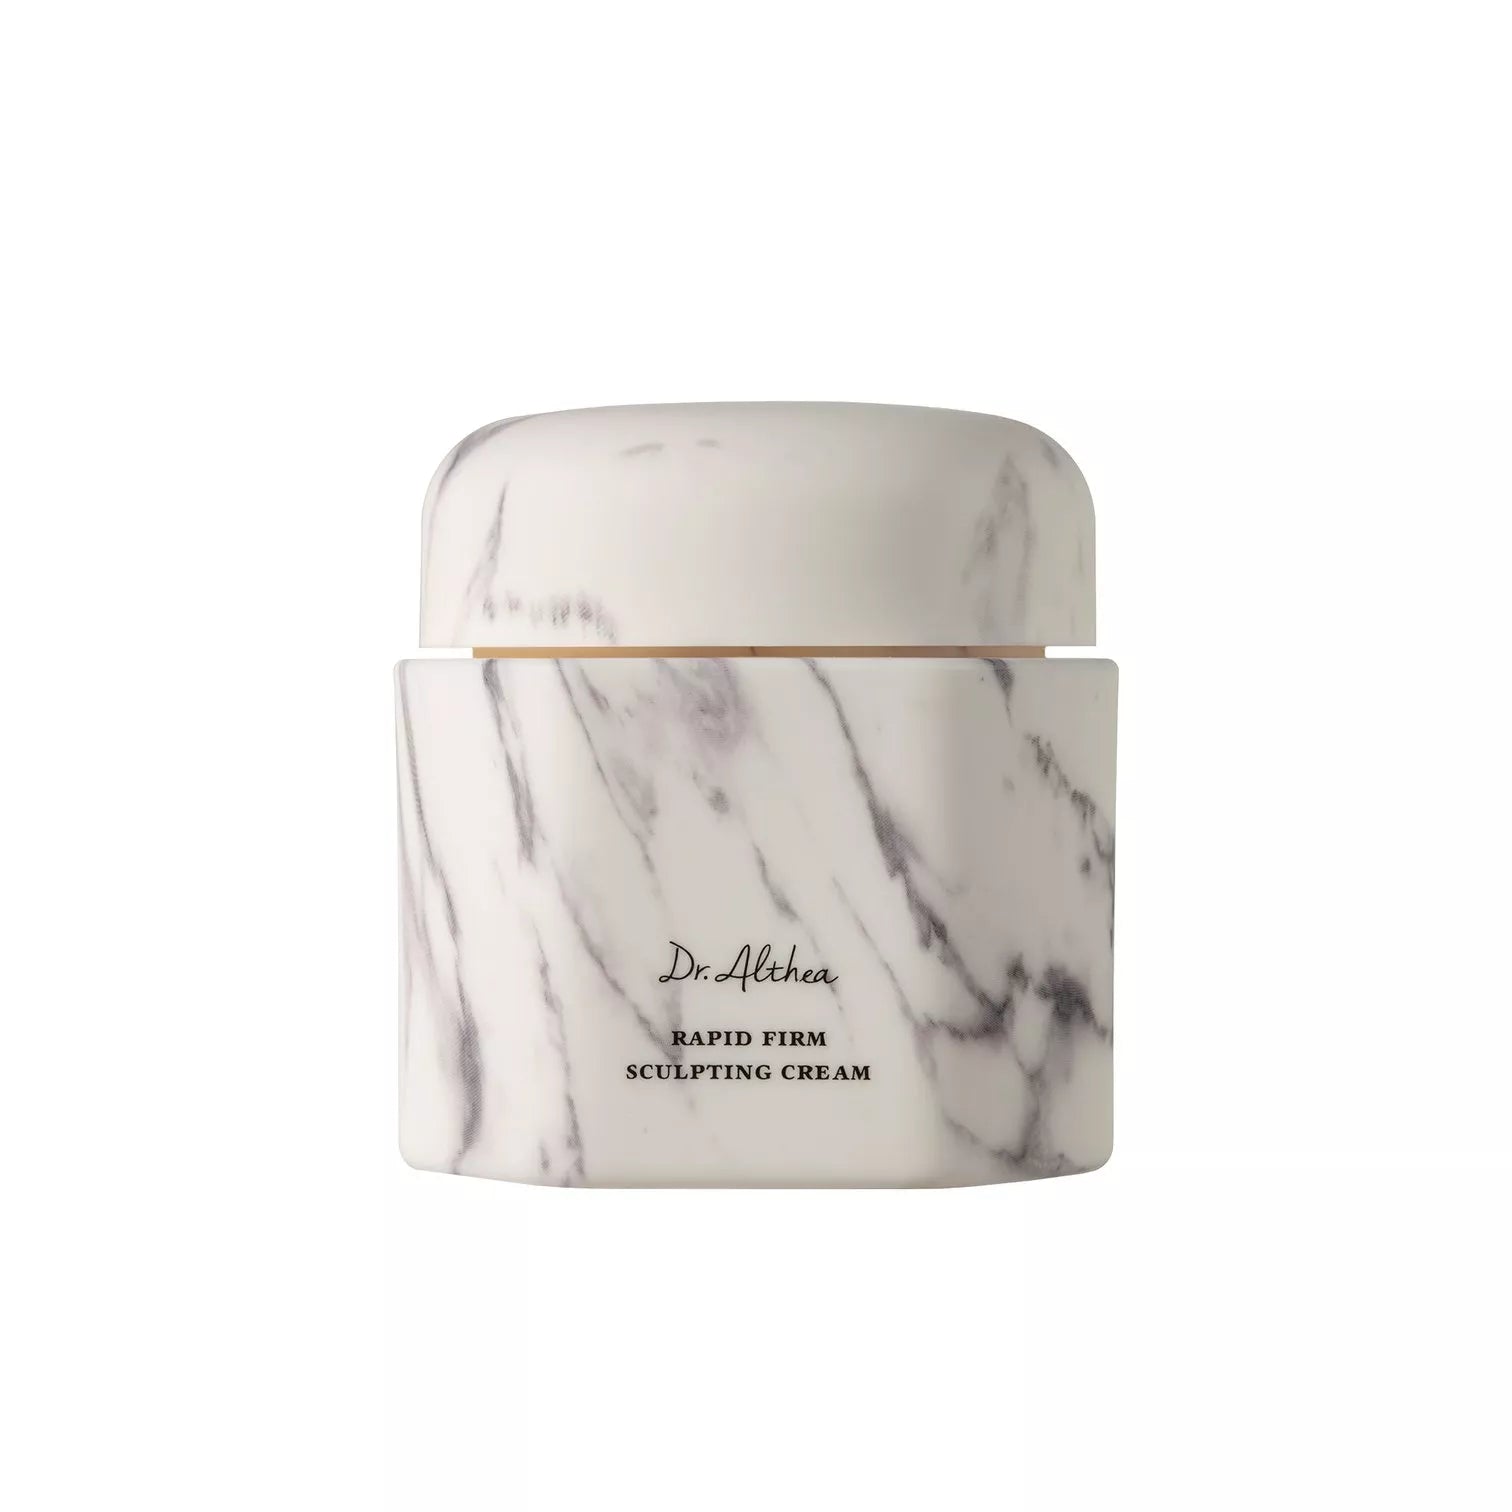 DR. ALTHEA - Rapid Firm Sculpting Cream (Discounted)